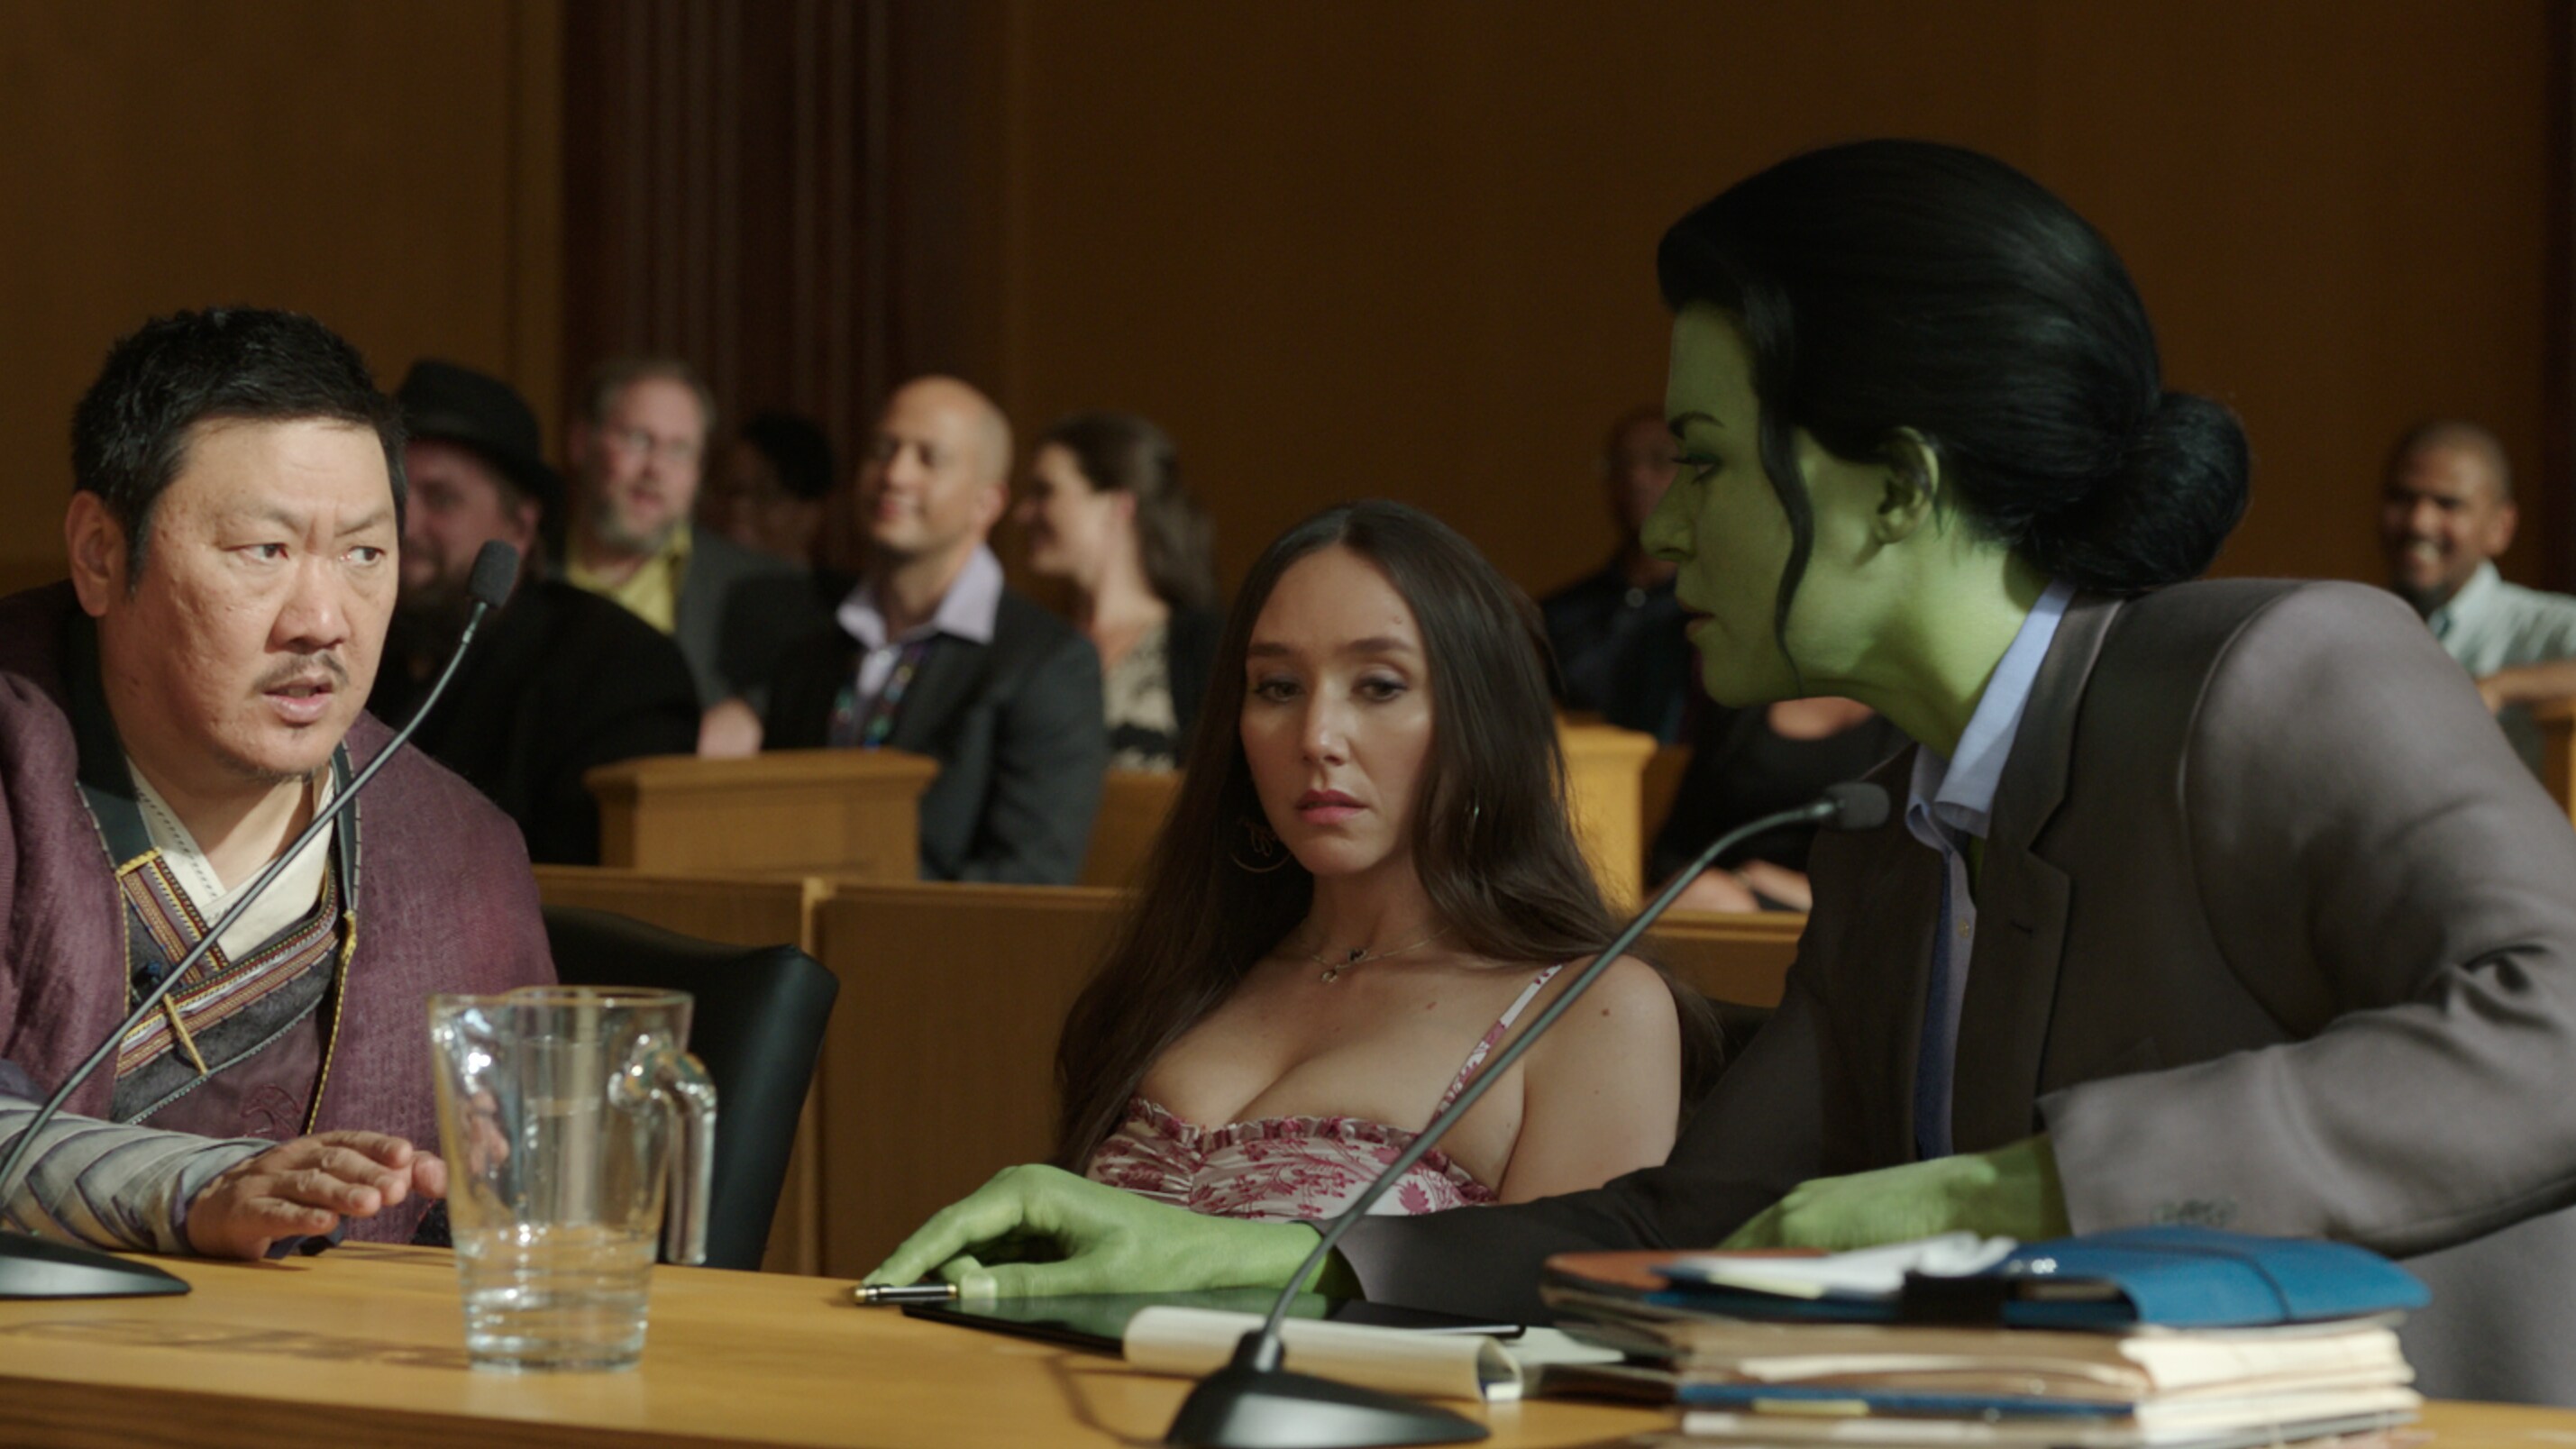 Wong and She-Hulk talking in court.